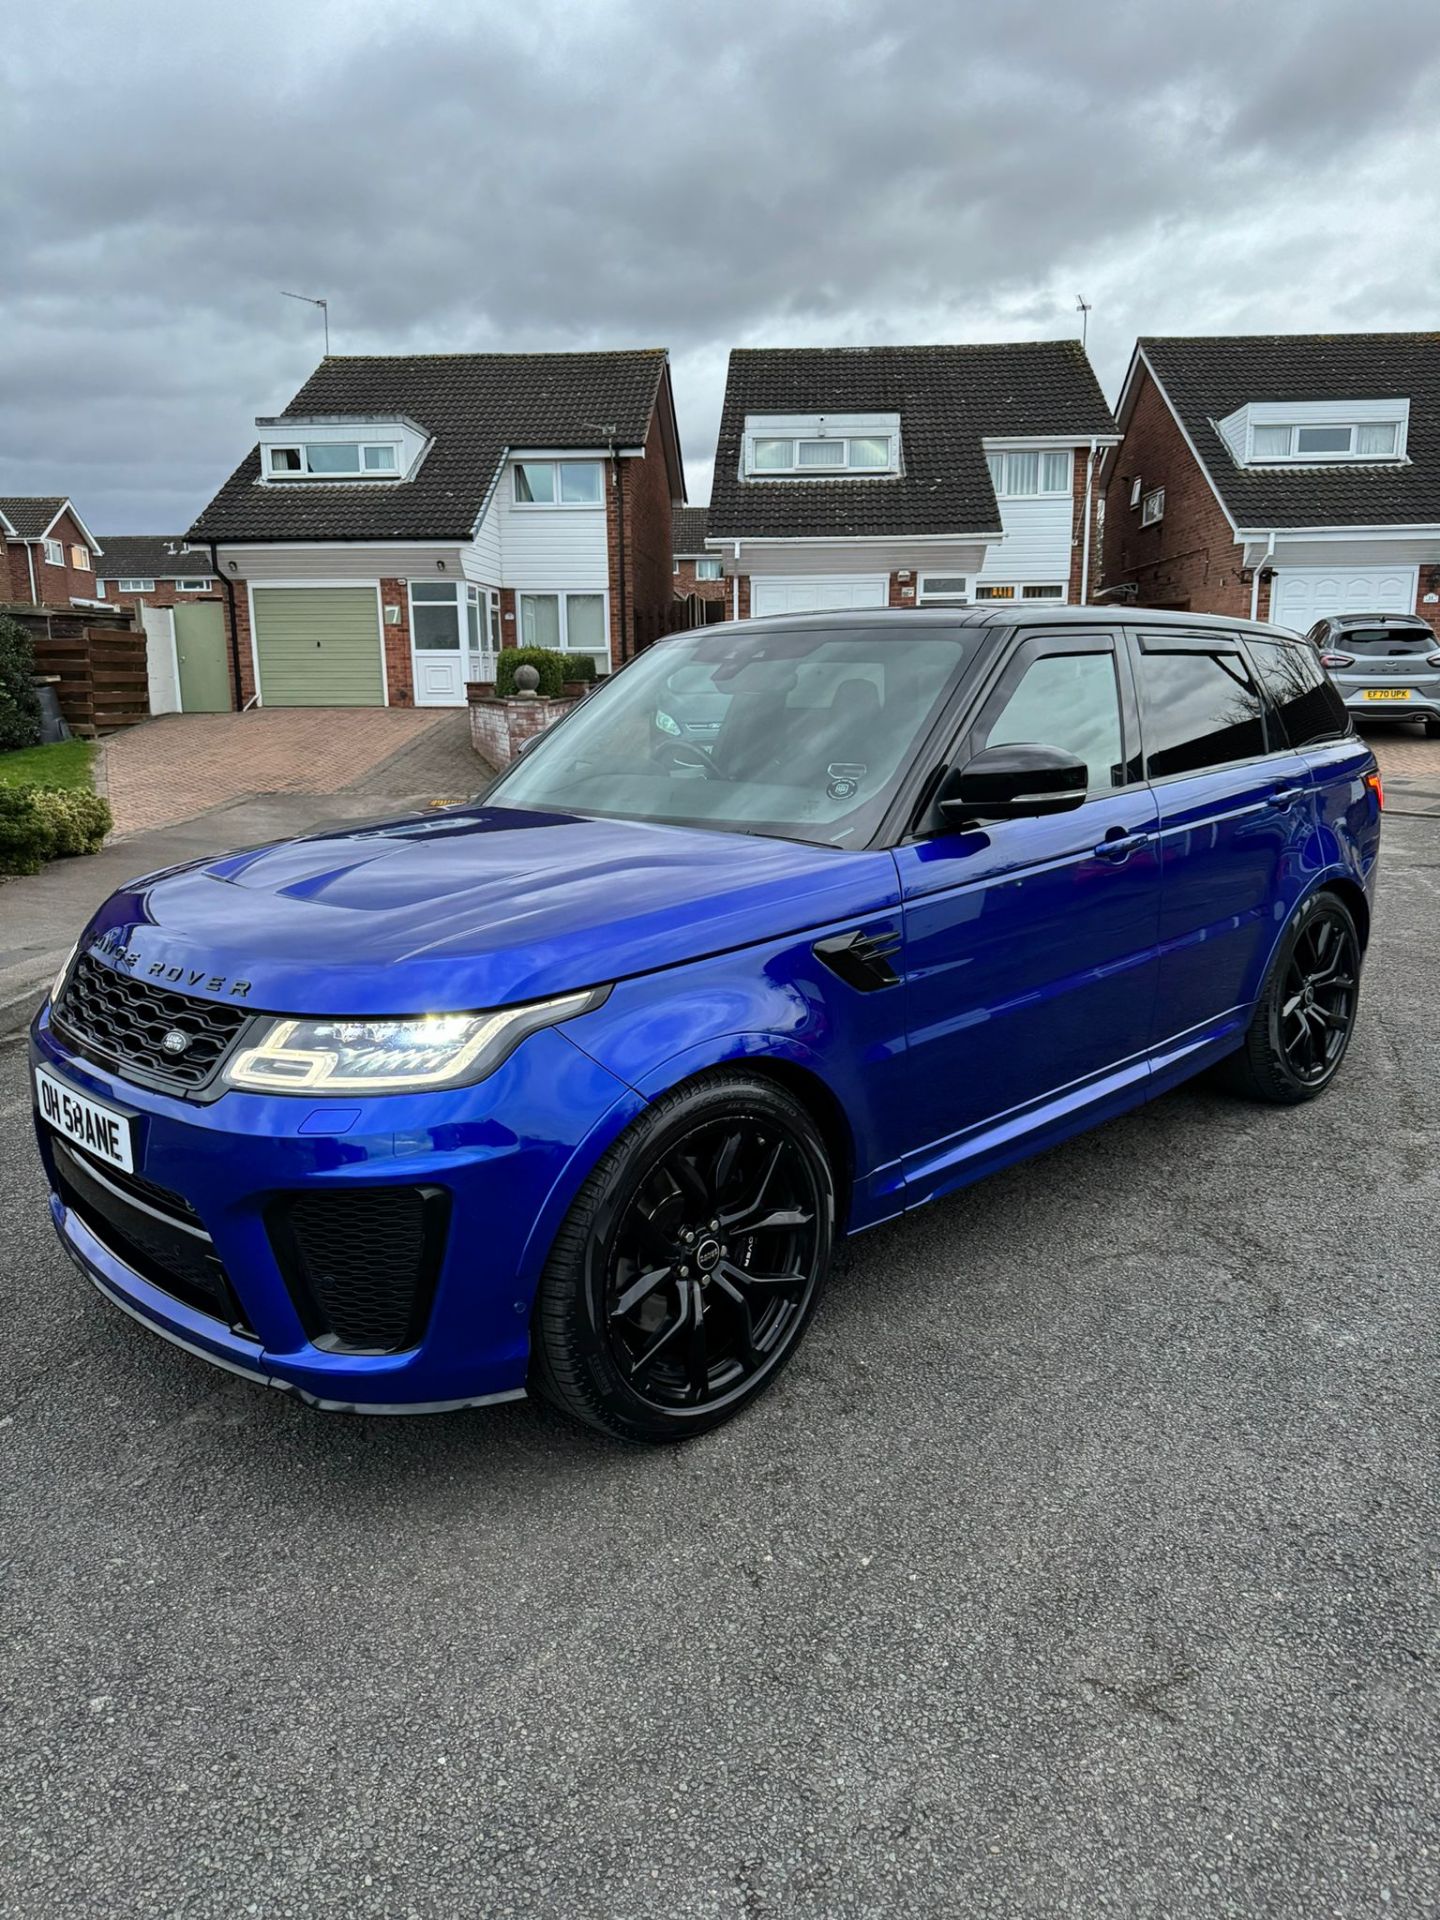 2018 18 RANGE ROVER SVR - 62K MILES WITH FULL LAND ROVER HISTORY - EXTREMELY CLEAN EXAMPLE.